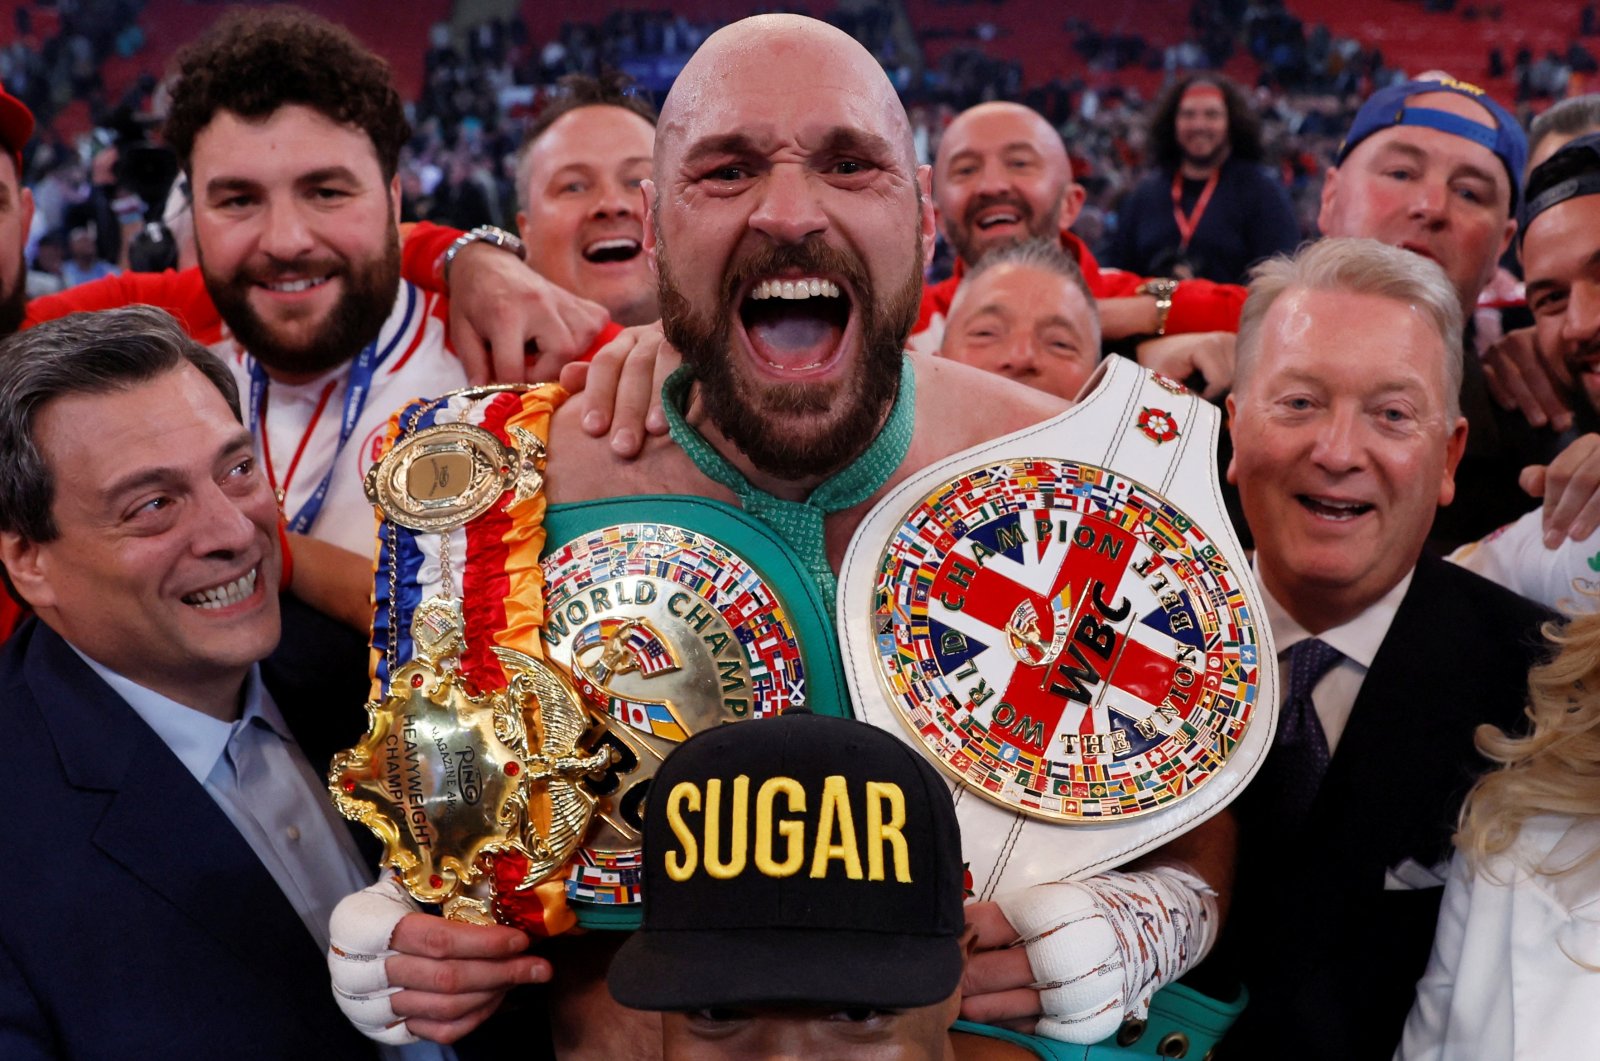 Tyson Fury celebrates after winning his fight against Dillian Whyte, London, England, April 23, 2022. (Reuters Photo)